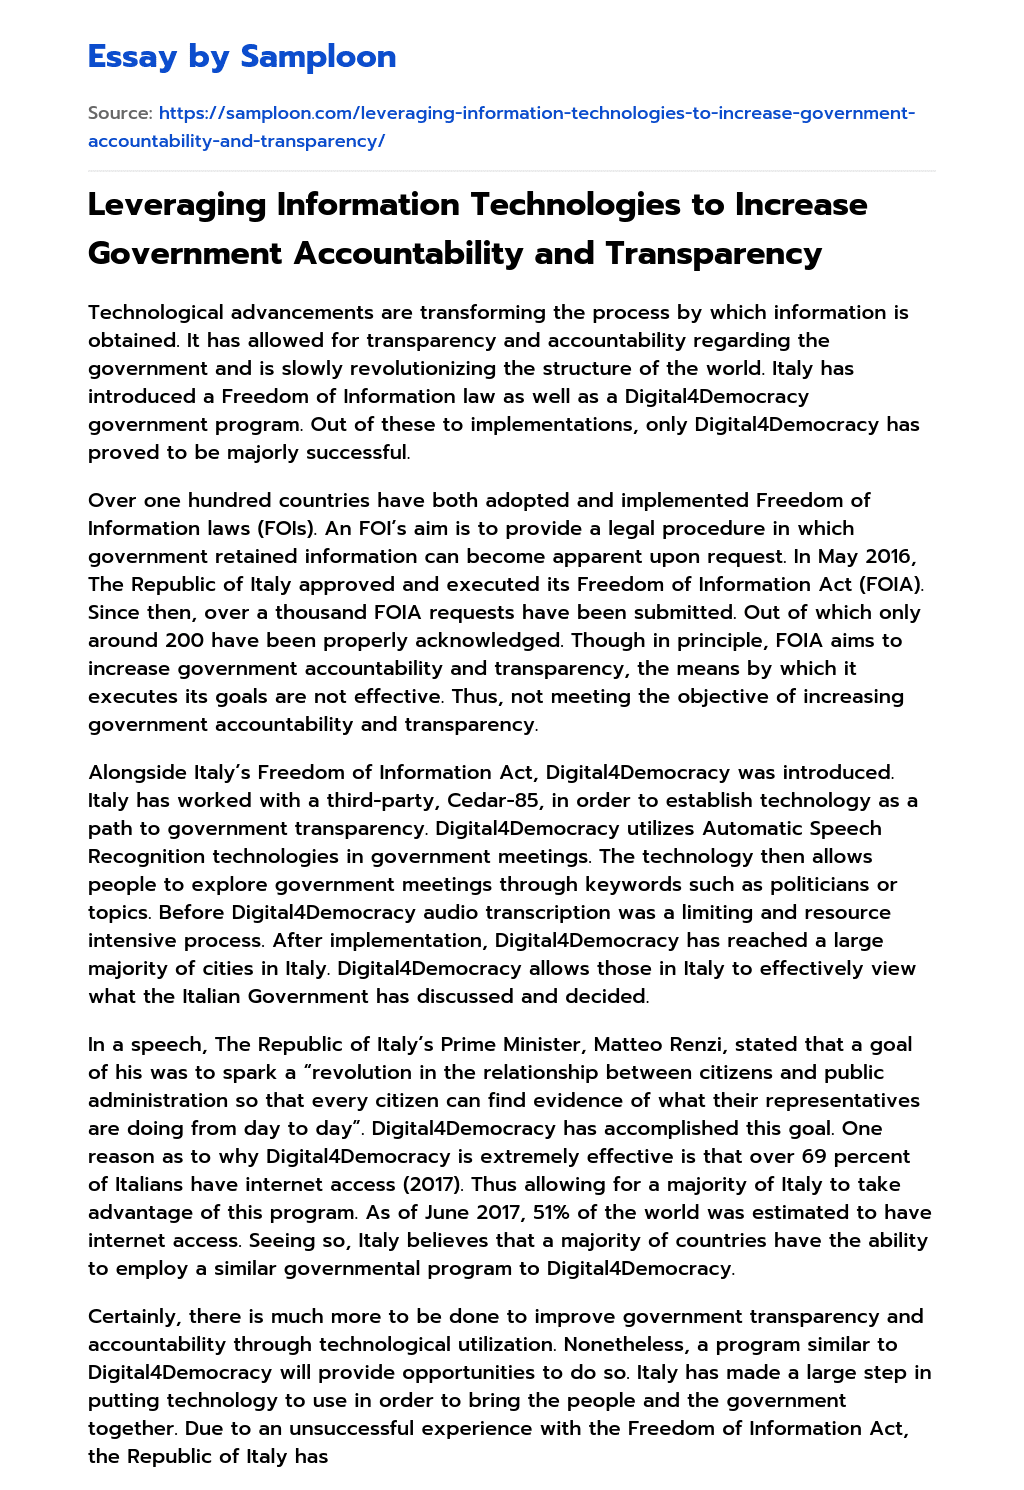 Leveraging Information Technologies to Increase Government Accountability and Transparency essay